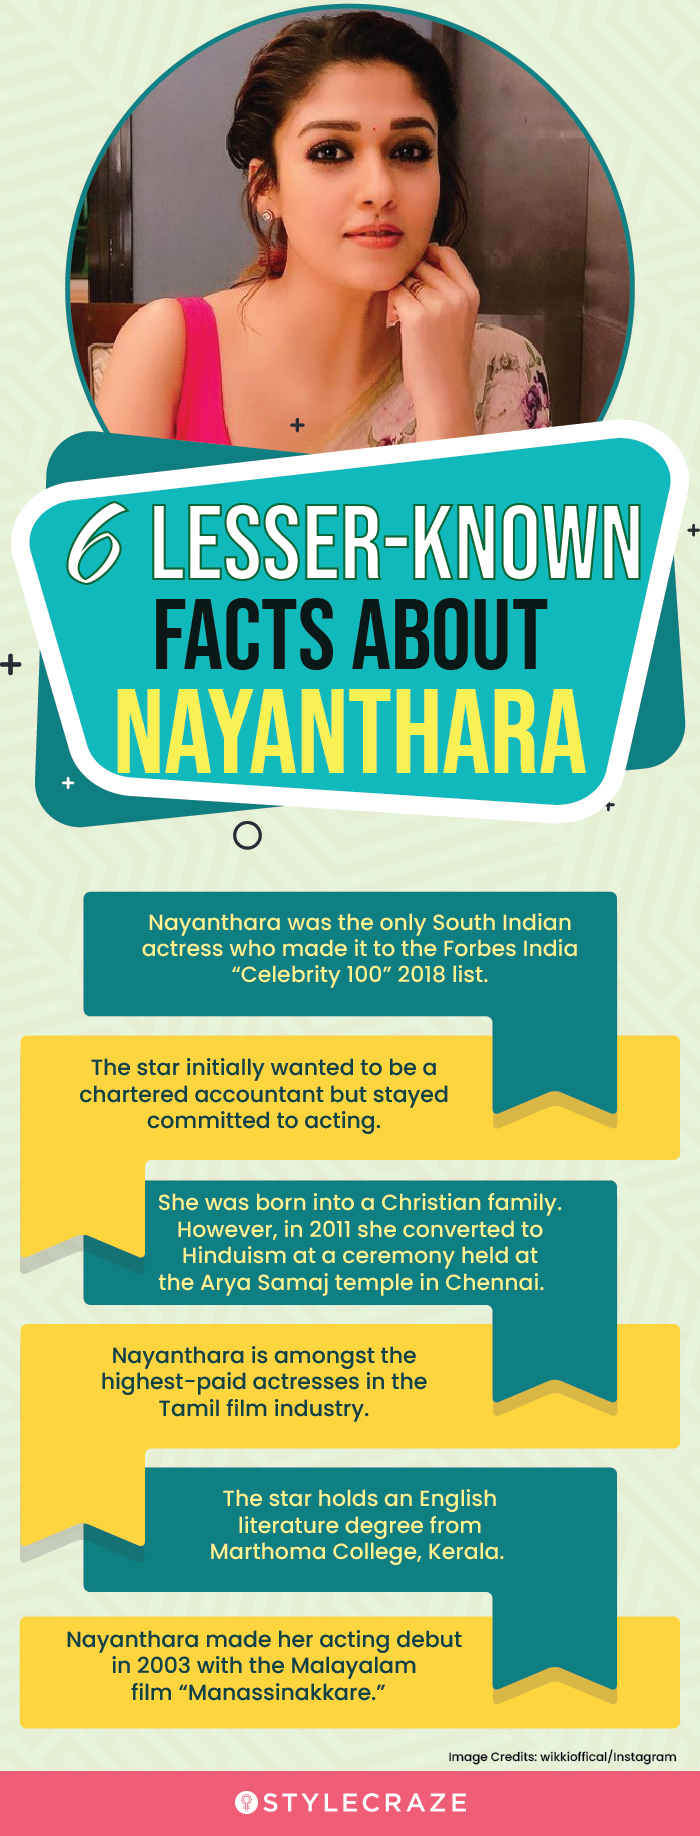 6 lesser known facts about nayanthara (infographic)